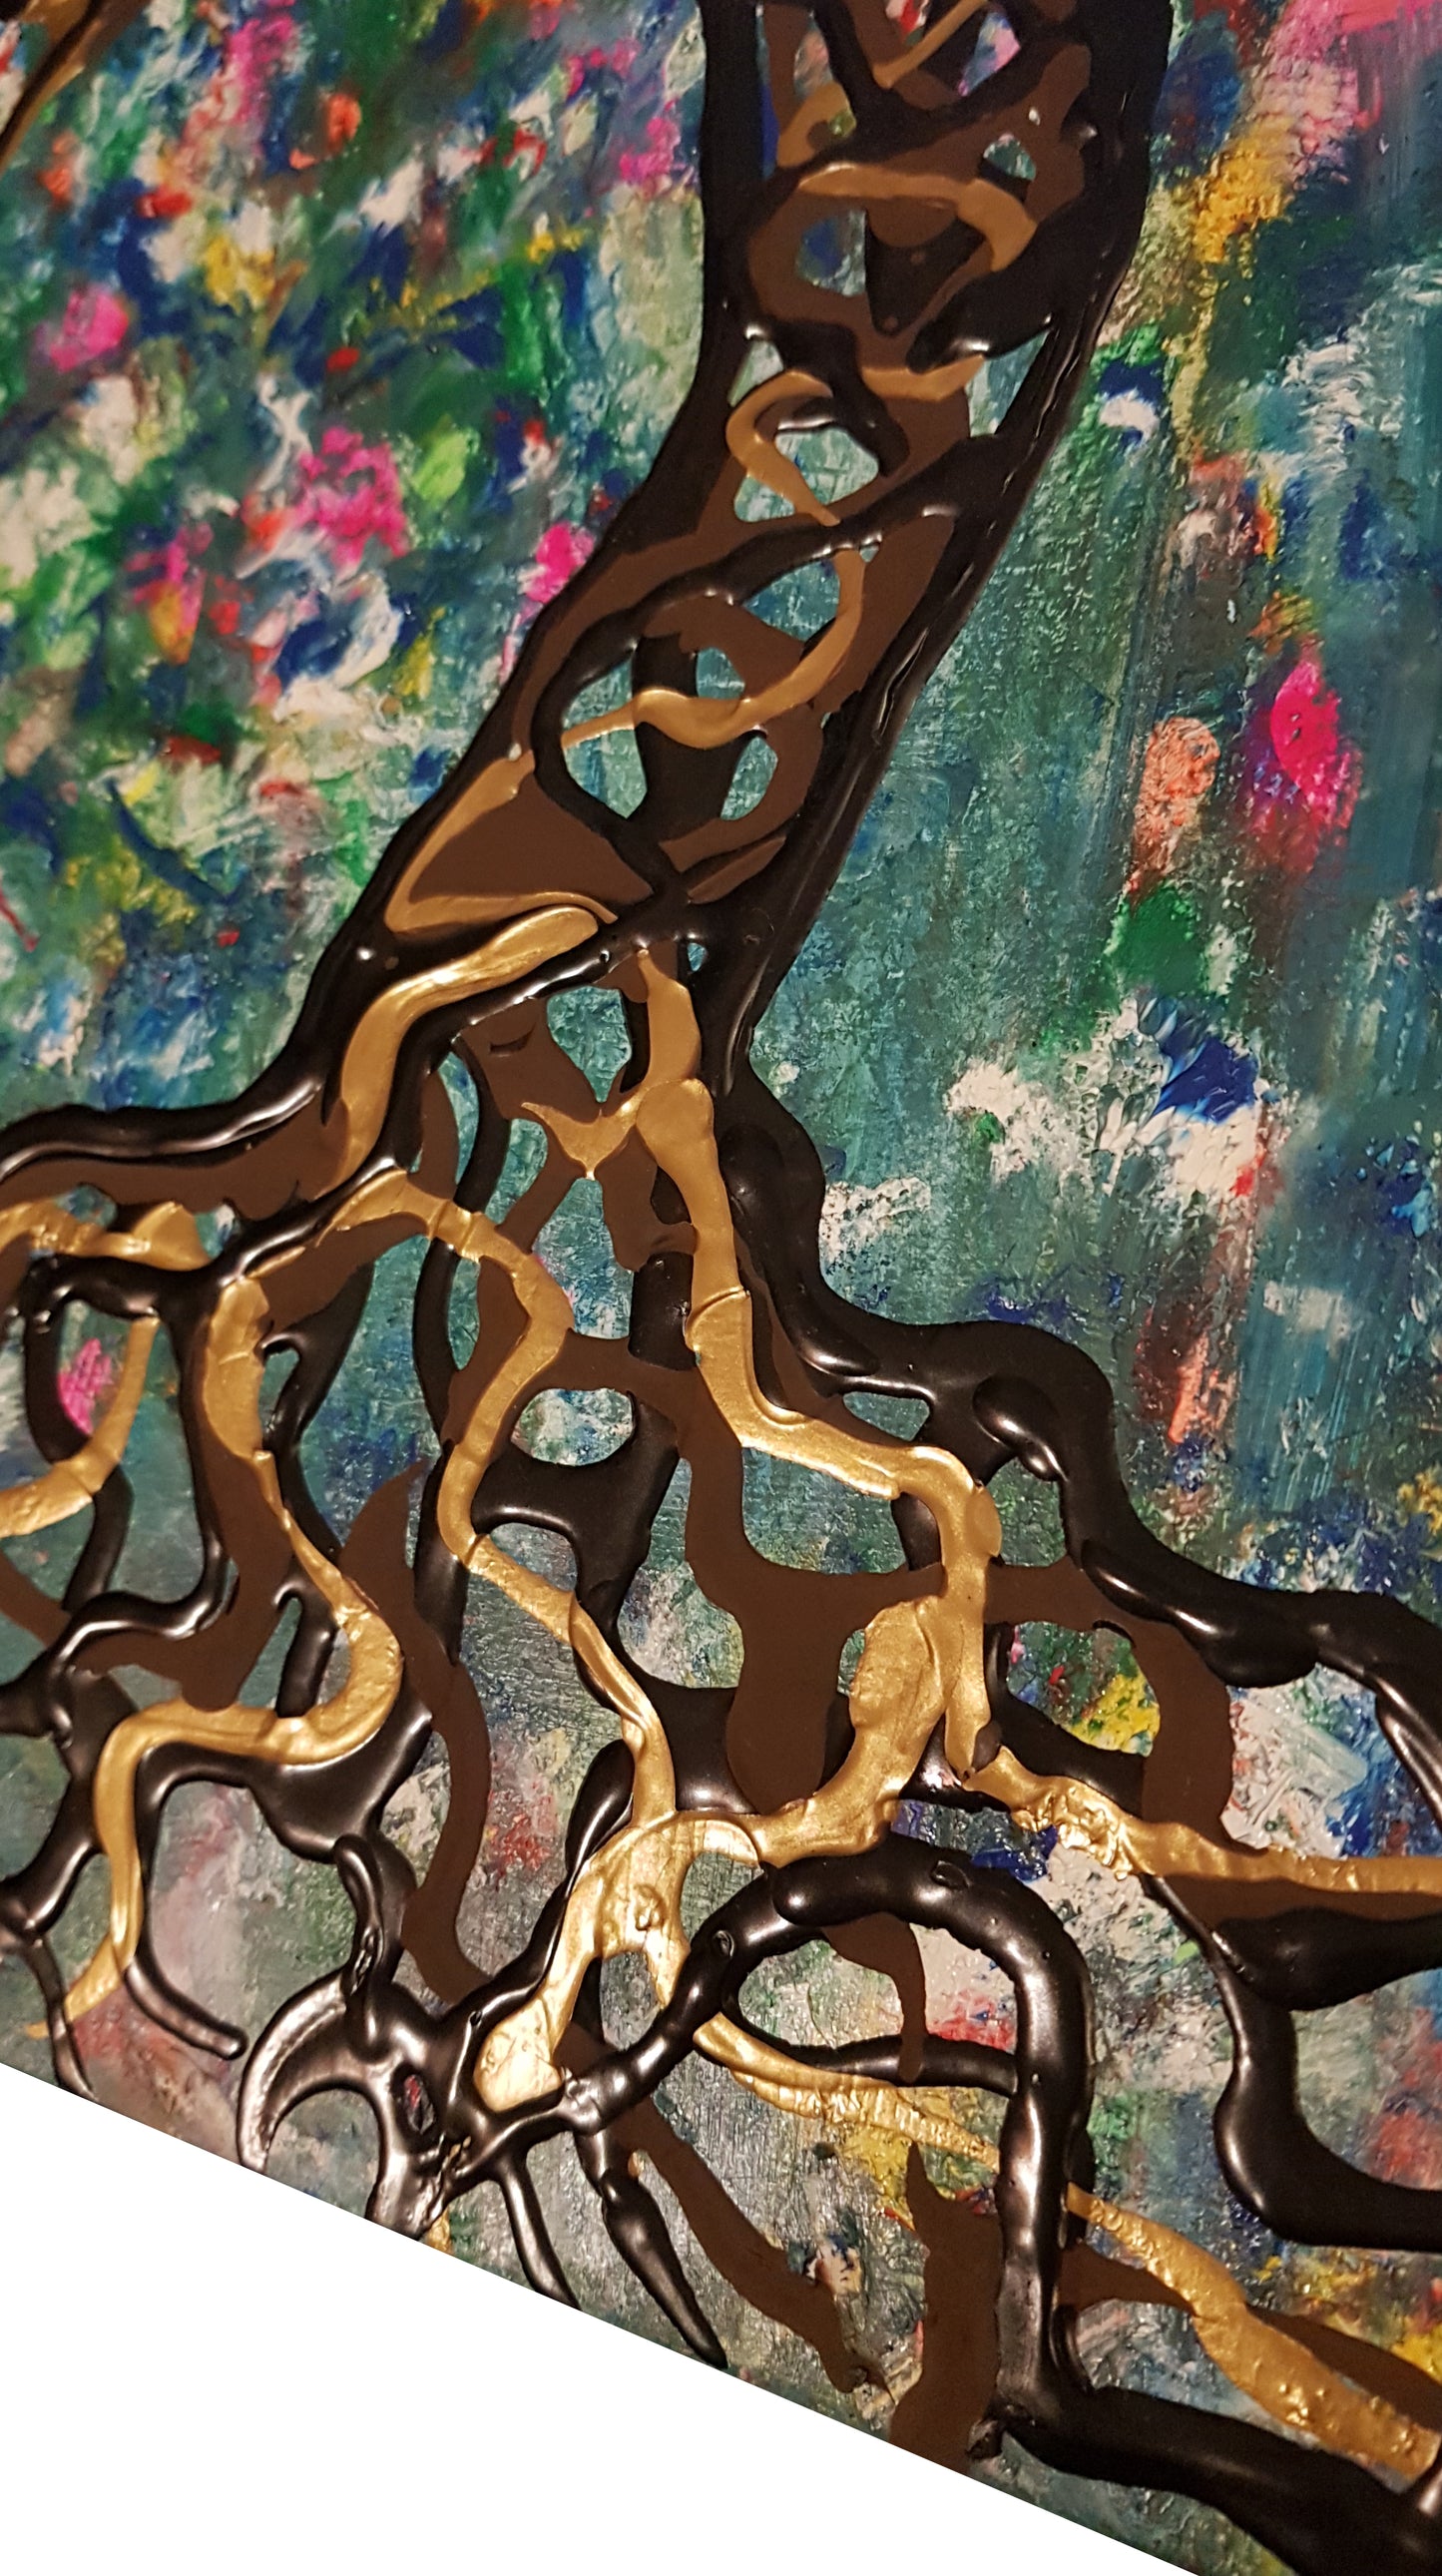 Roots-by-Alexandra-Romano-Art-Original-Whimsical-Textured-Tree-Branches-Painting-Gold-Black-Blue-Green-Colorful-Unique-Decor